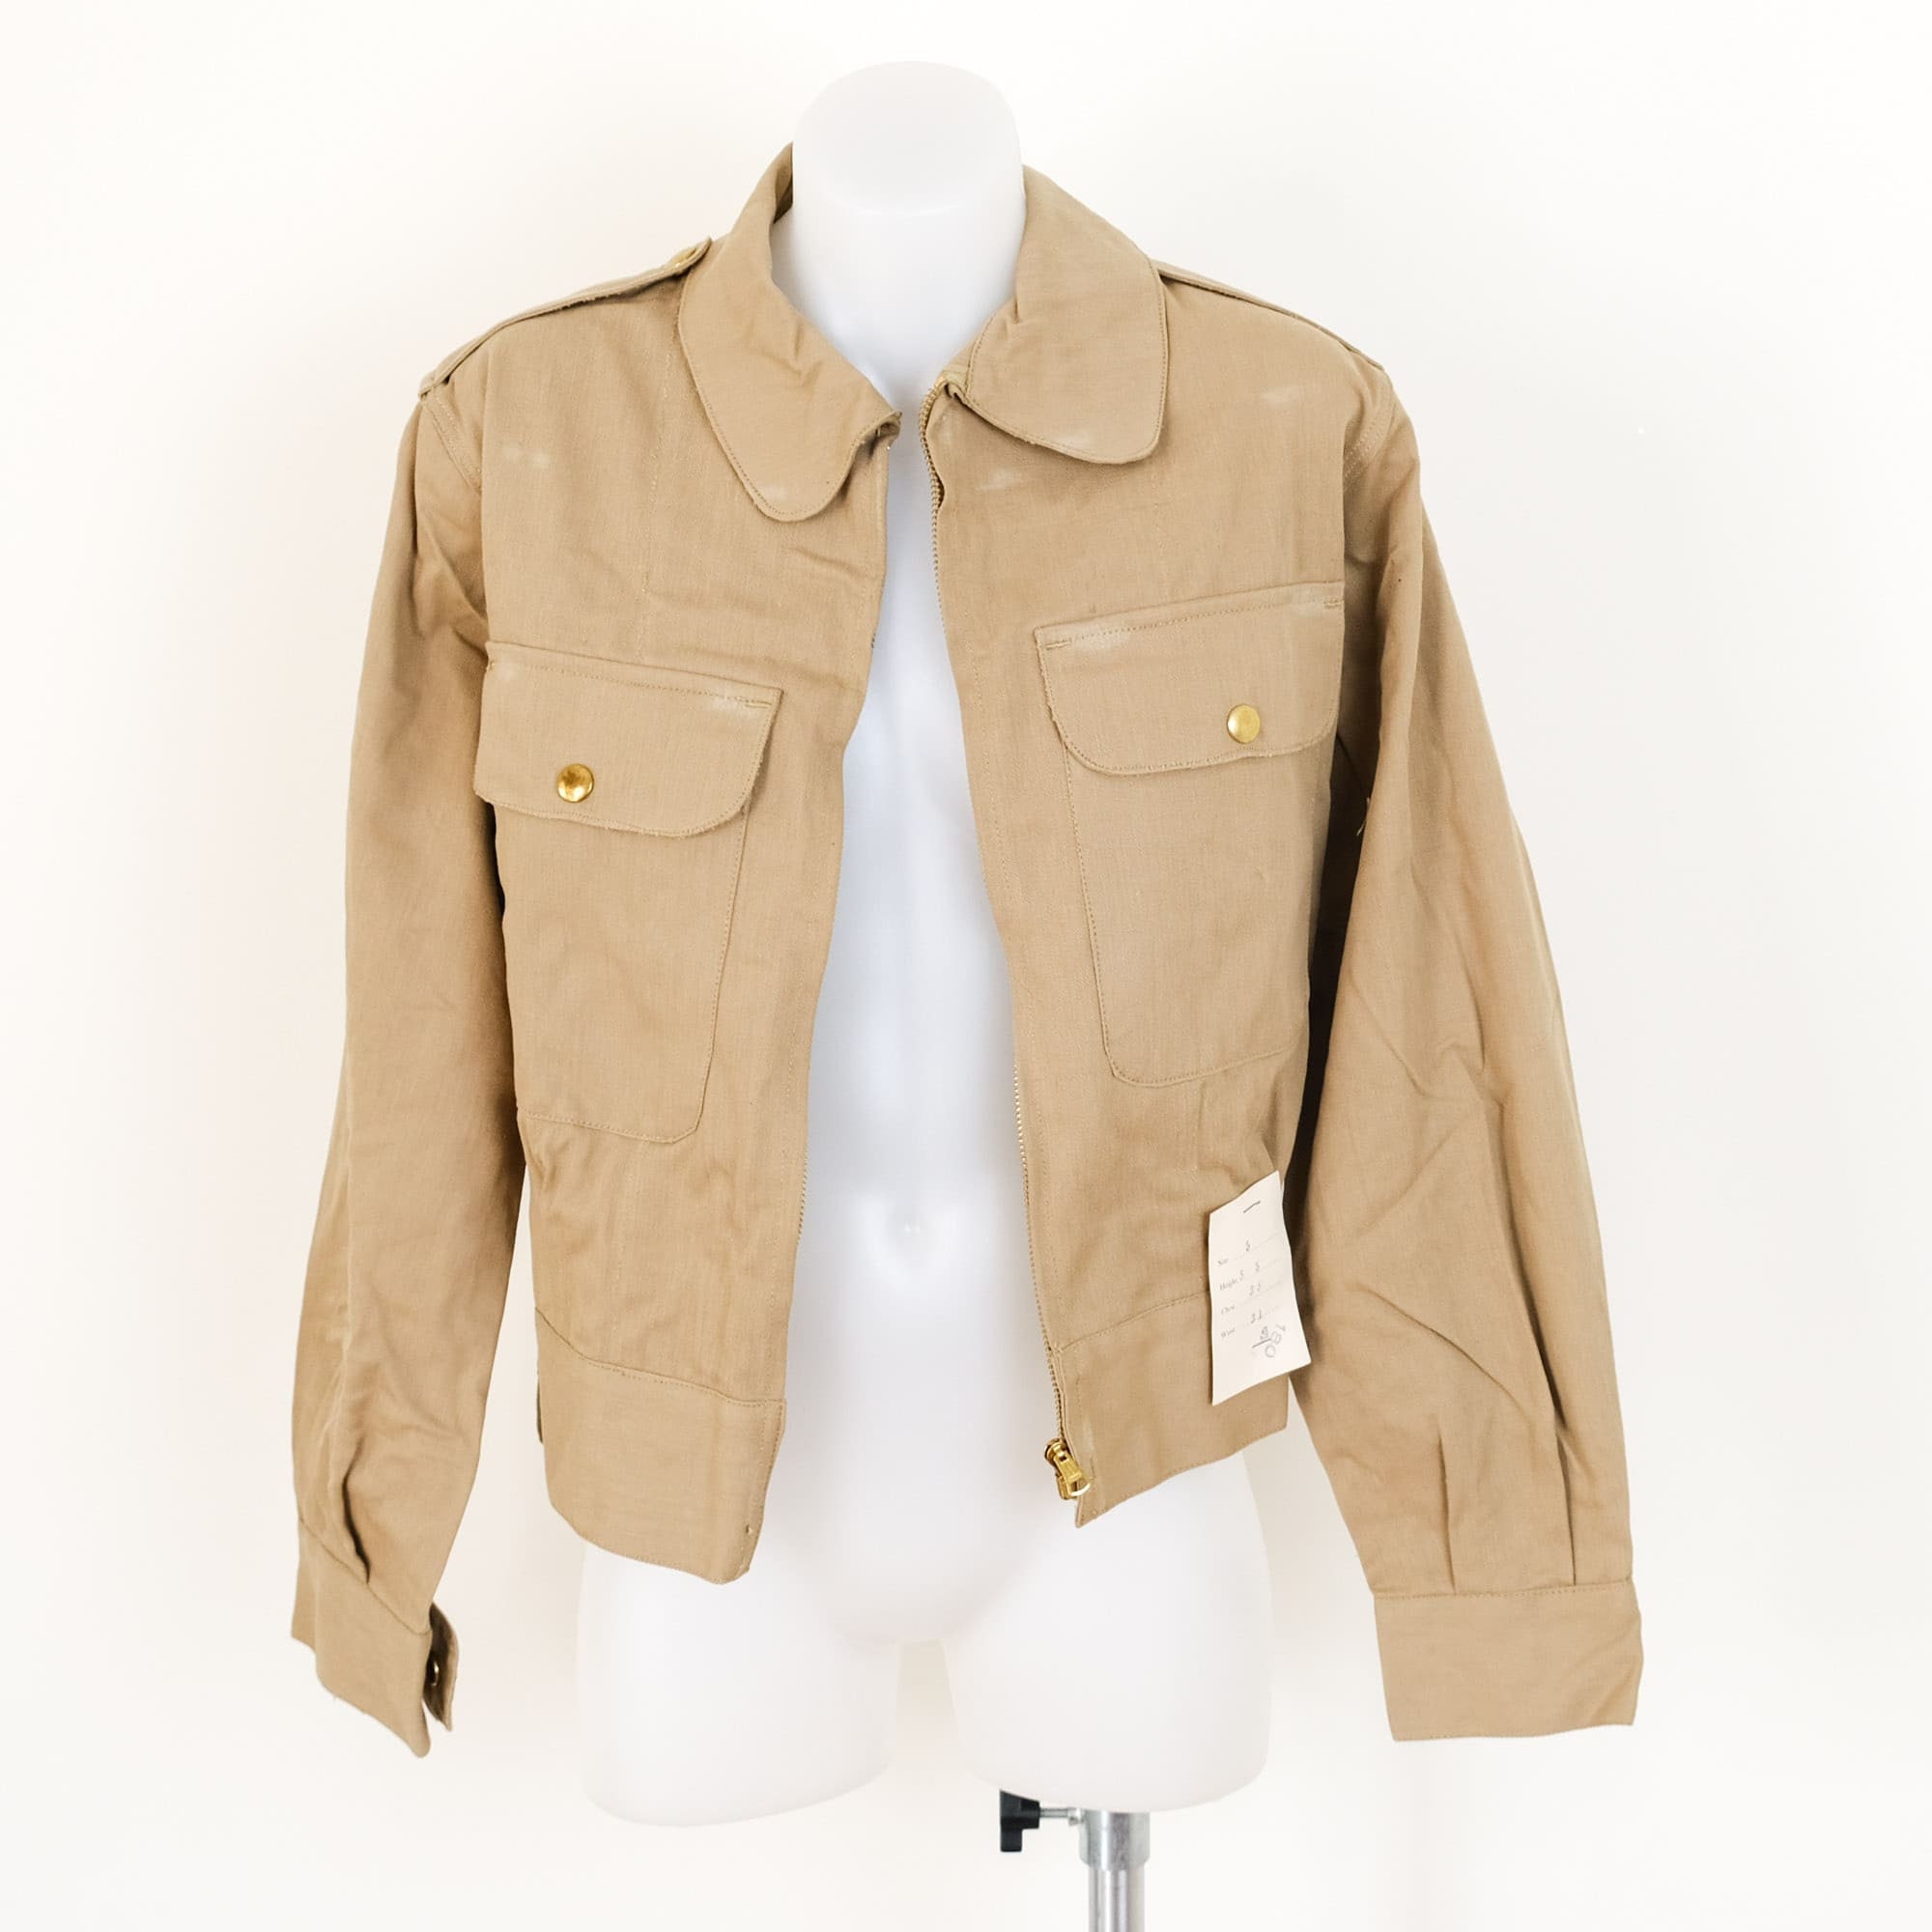 Vintage 50s Tan Military Cropped Bomber Jacket - Etsy